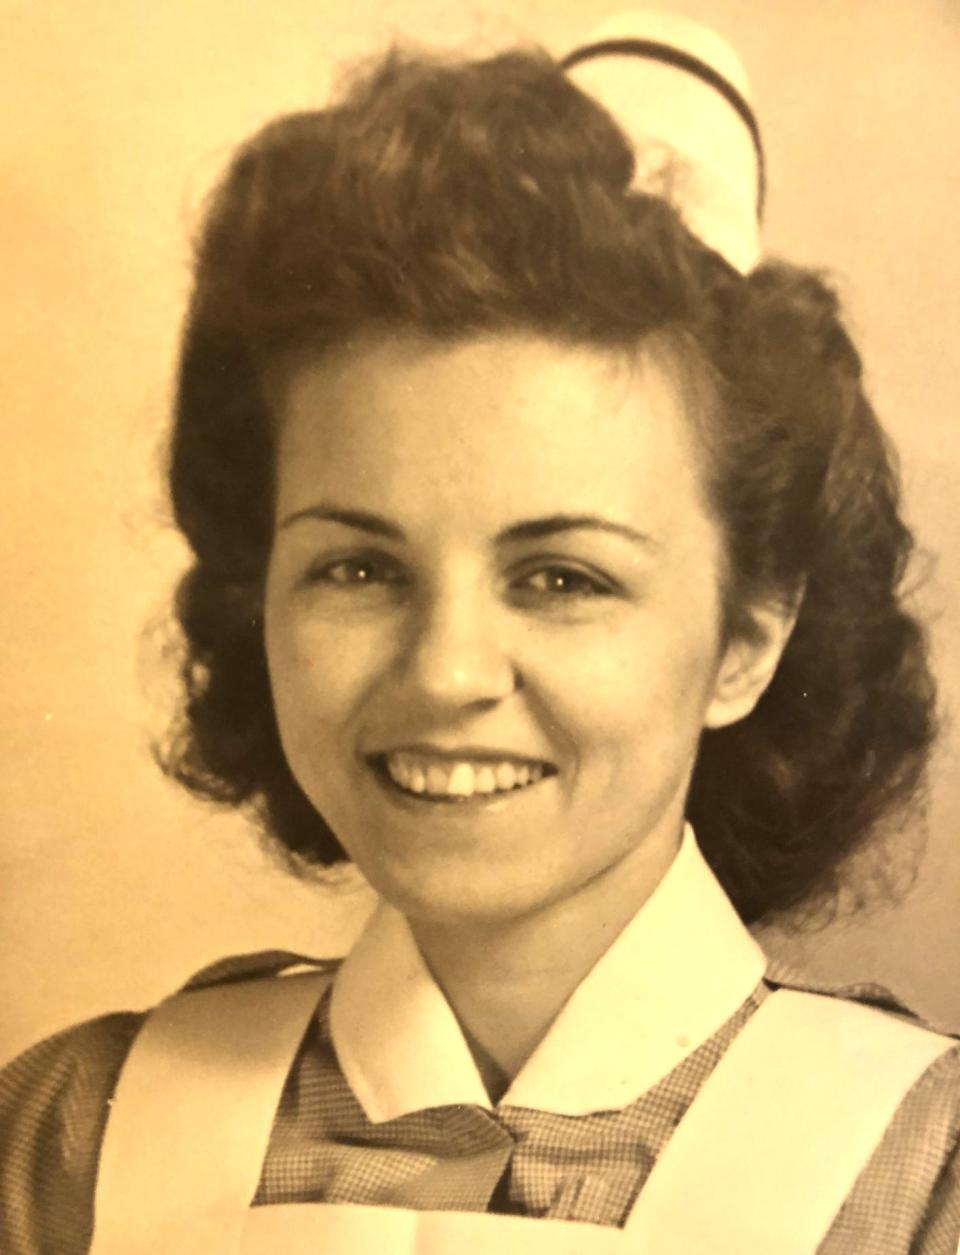 Josephine "Jo" Coletti as a student nurse at the Quincy City Hospital School of Nursing in 1942-43. She was a member of the U.S. Cadet Nurse Corps.